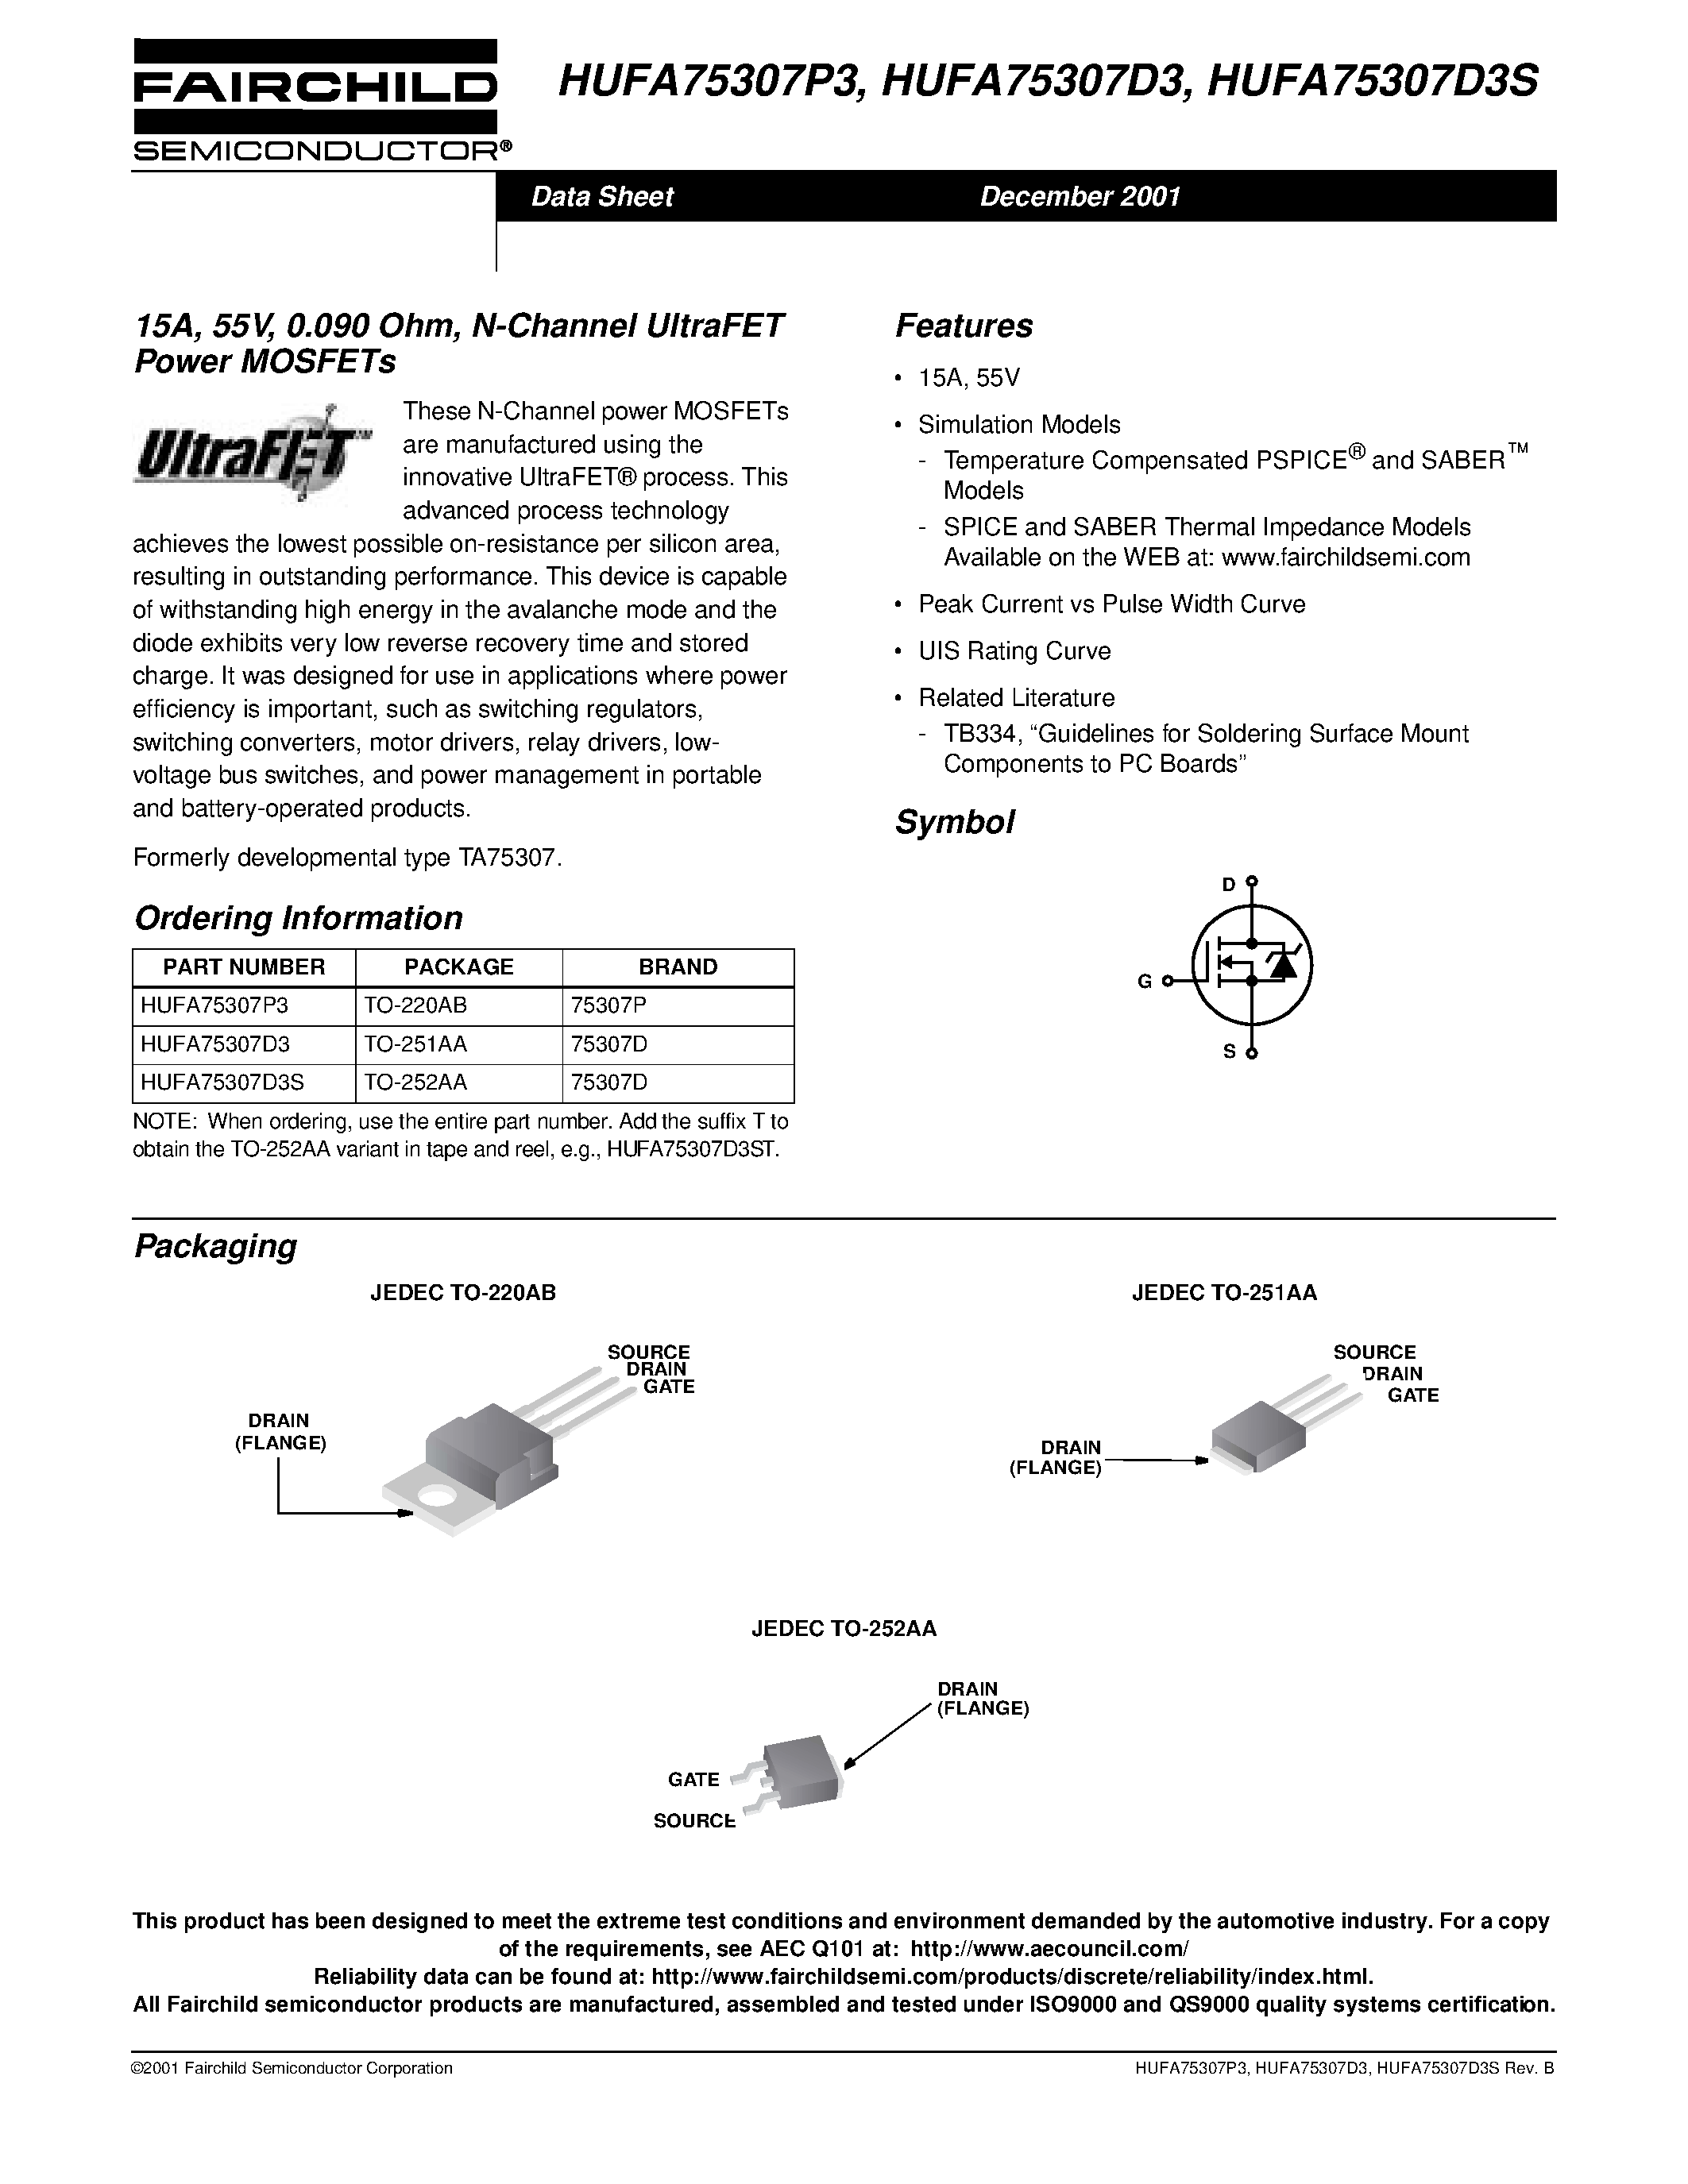 Datasheet HUFA75307P3 - 15A/ 55V/ 0.090 Ohm/ N-Channel UltraFET Power MOSFETs page 1